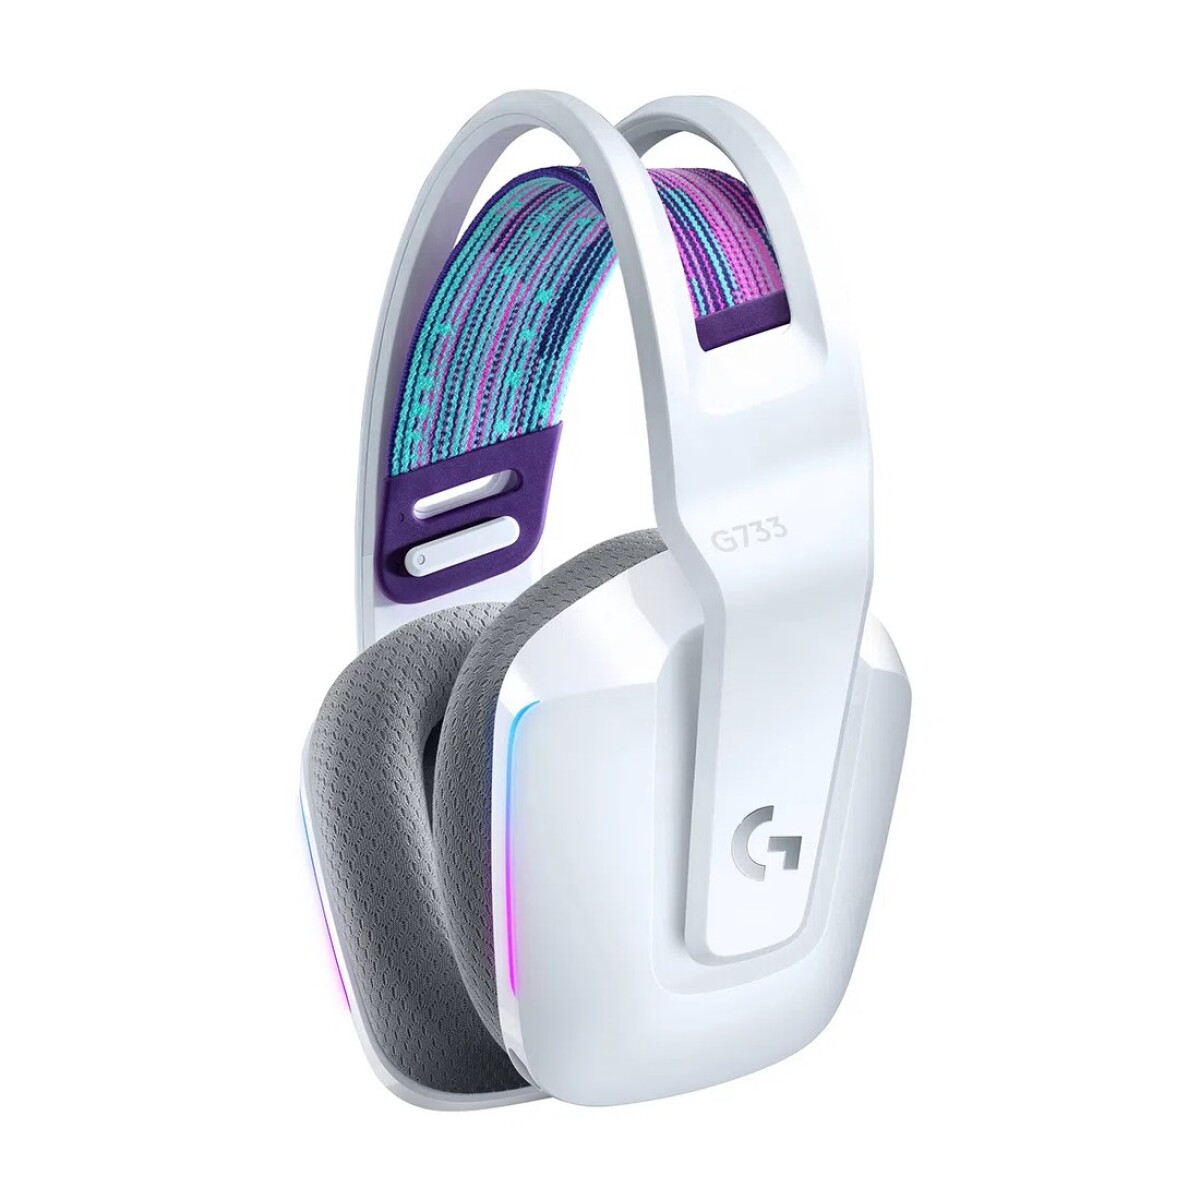 AURICULARES LOGITECH G733 GAMING HEADSET INALÁMBRICOS RGB White